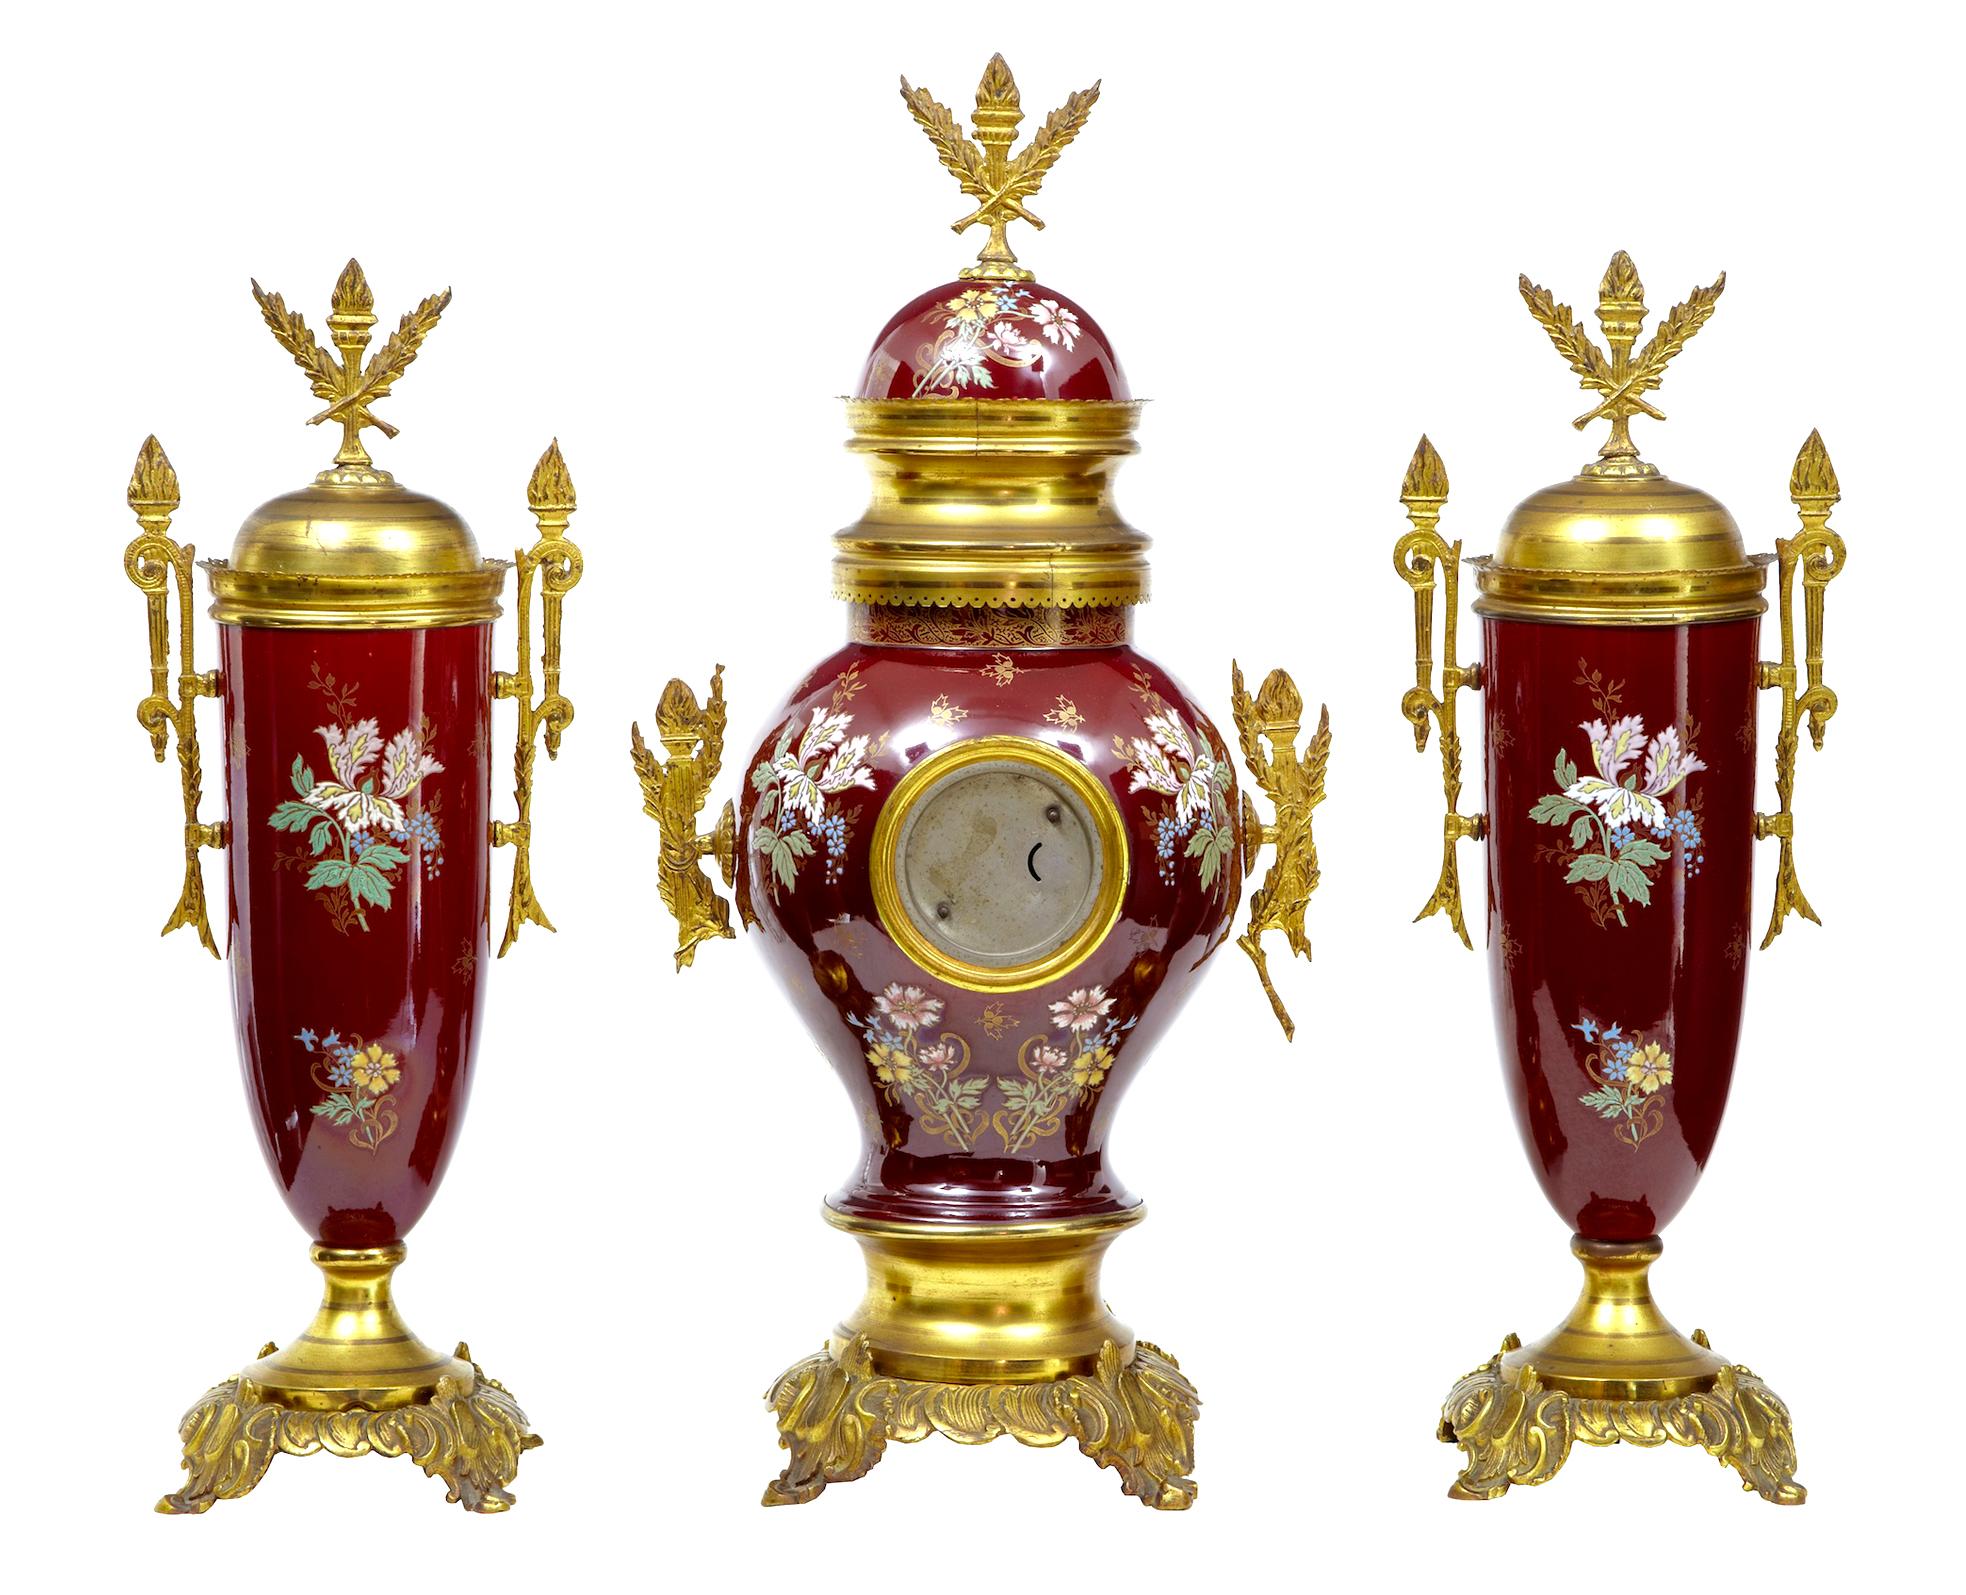 19th century French decorative toleware garniture set, circa 1880.

Fine example of a 3 piece garniture set, hand painted toleware decorated with ornate Ormolu mounts. Clock fitted with Arabic numerals.

Some discoloration to Ormolu.